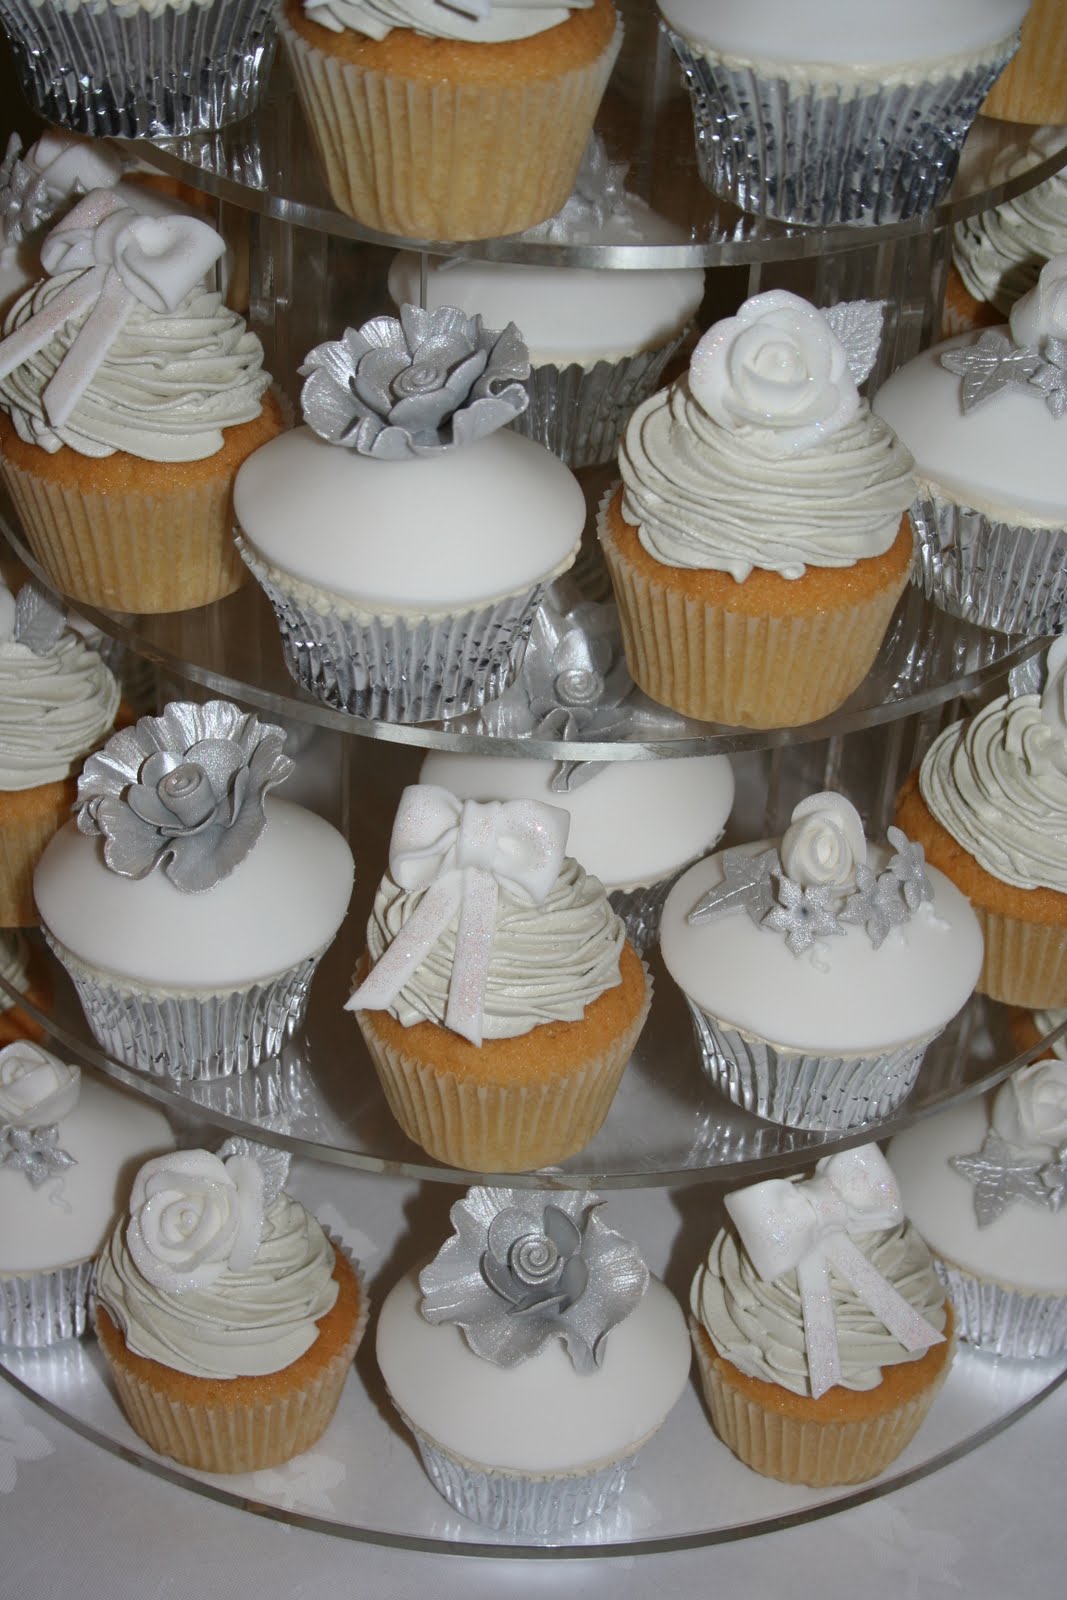 White and Silver Wedding Cake with Cupcakes